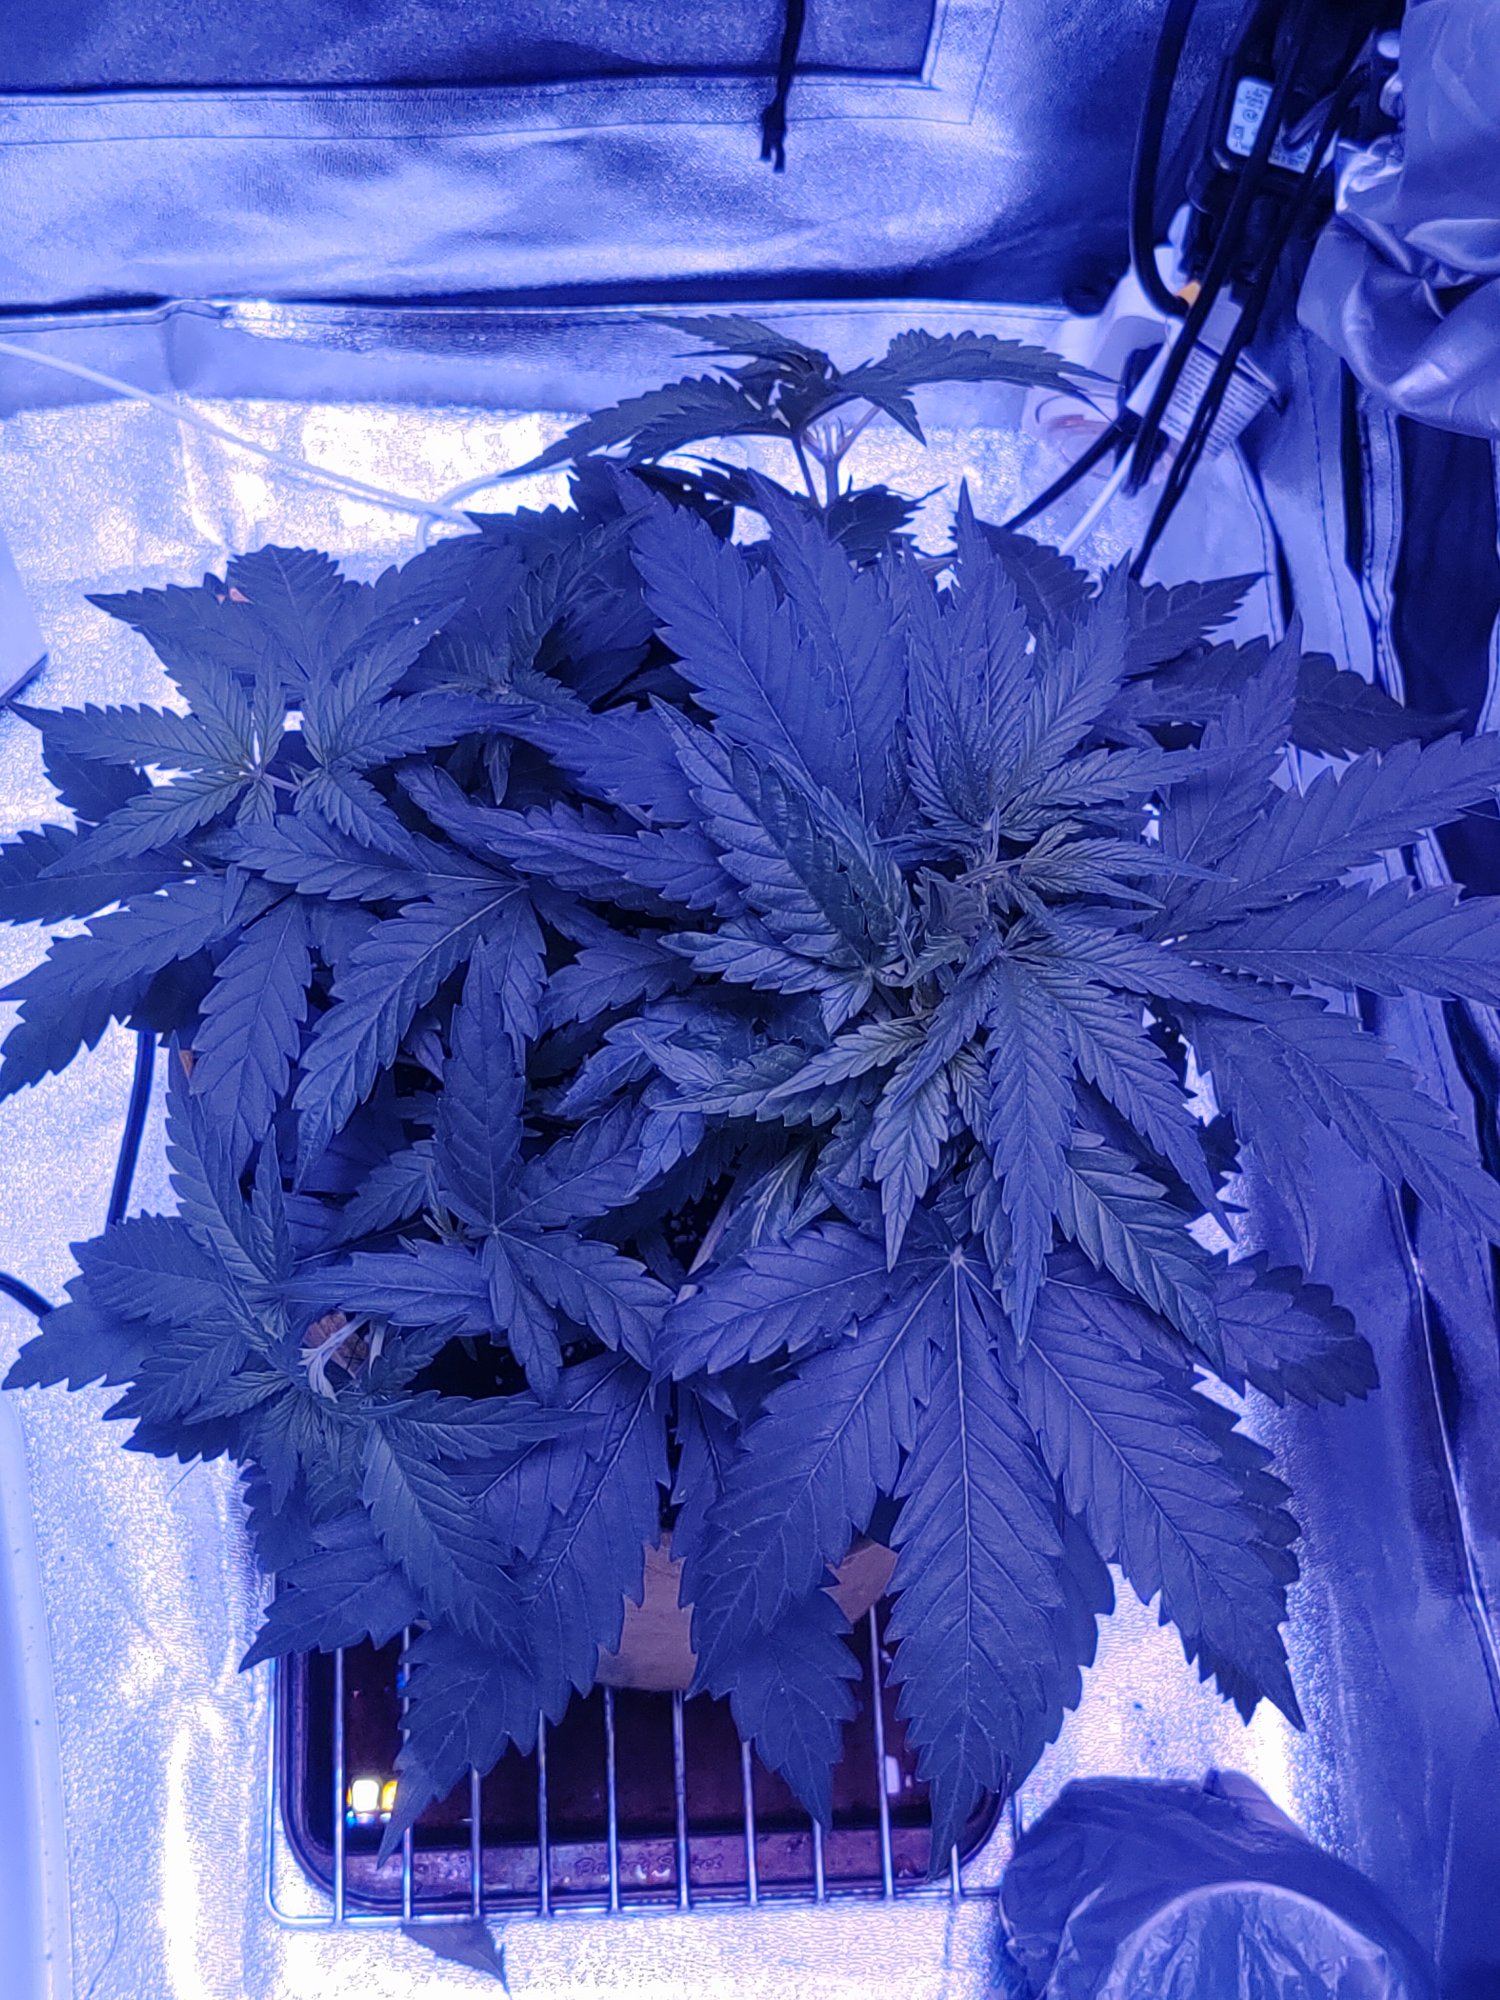 The im perpetually learning grow thread 3